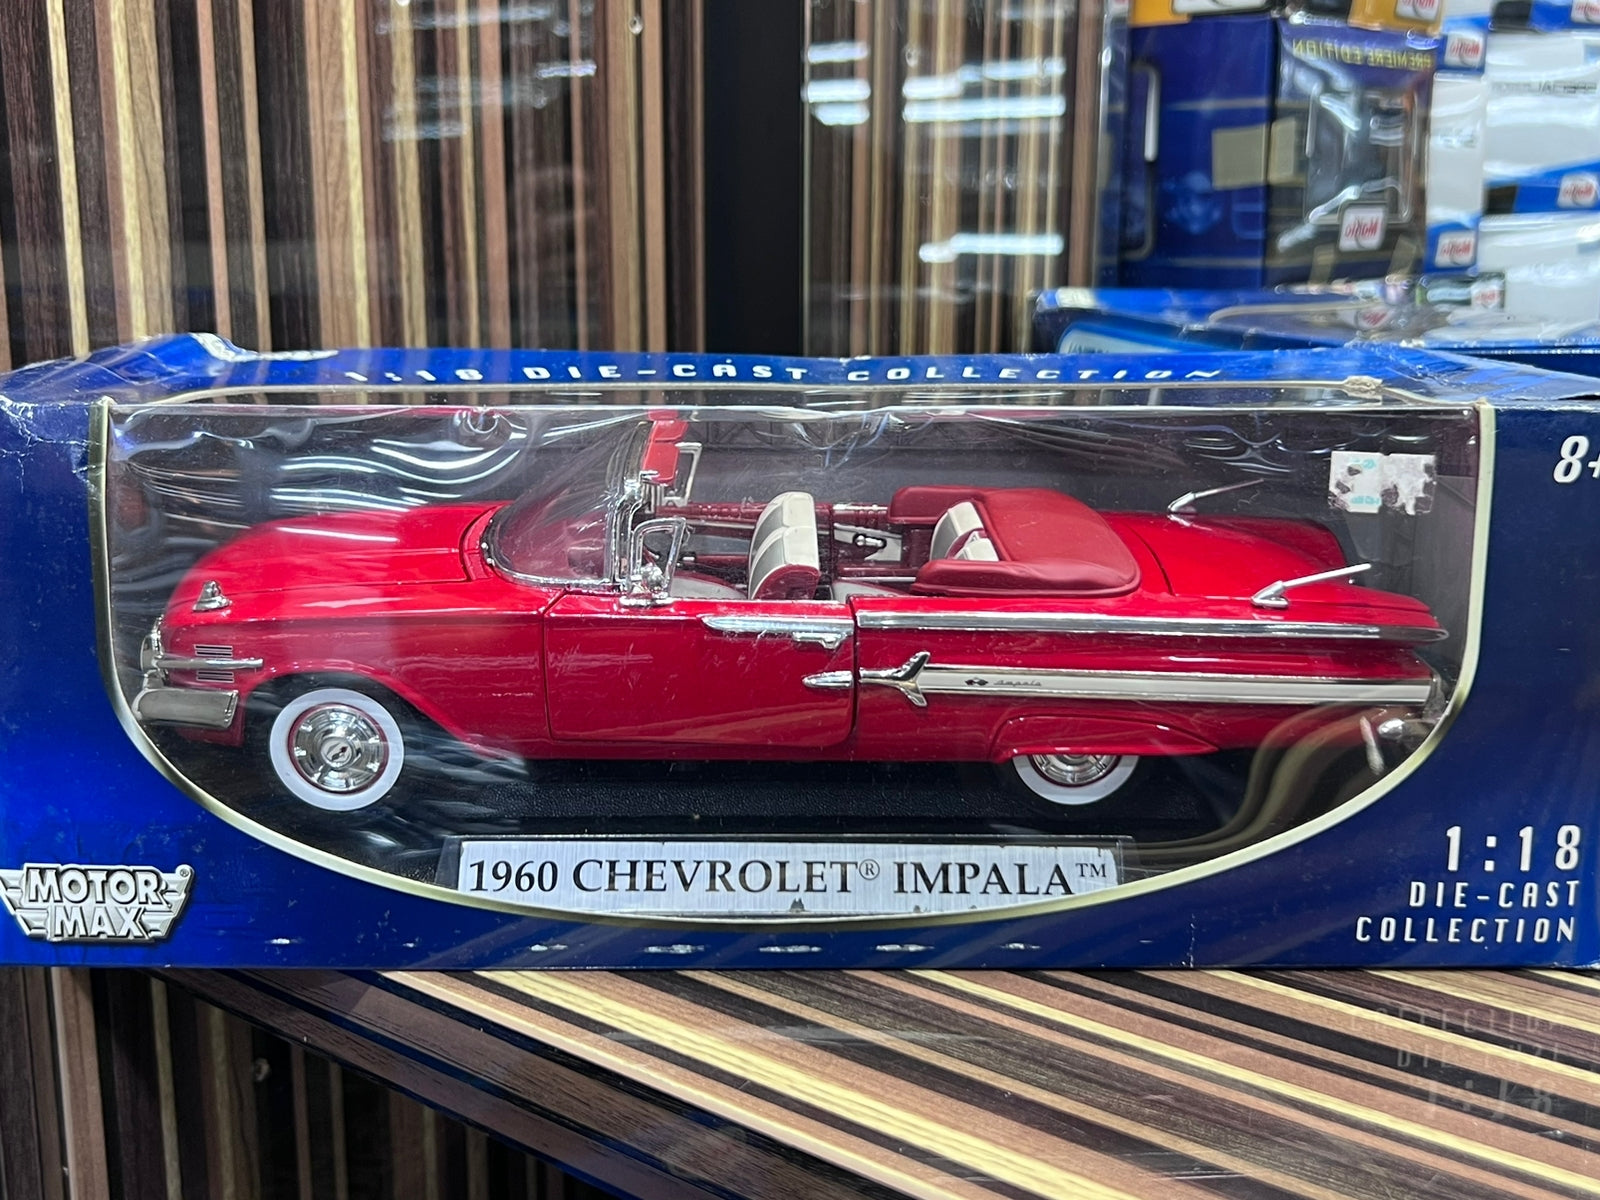 1/18 Diecast Chevrolet Impala 1960 Red Model Car by Motormax